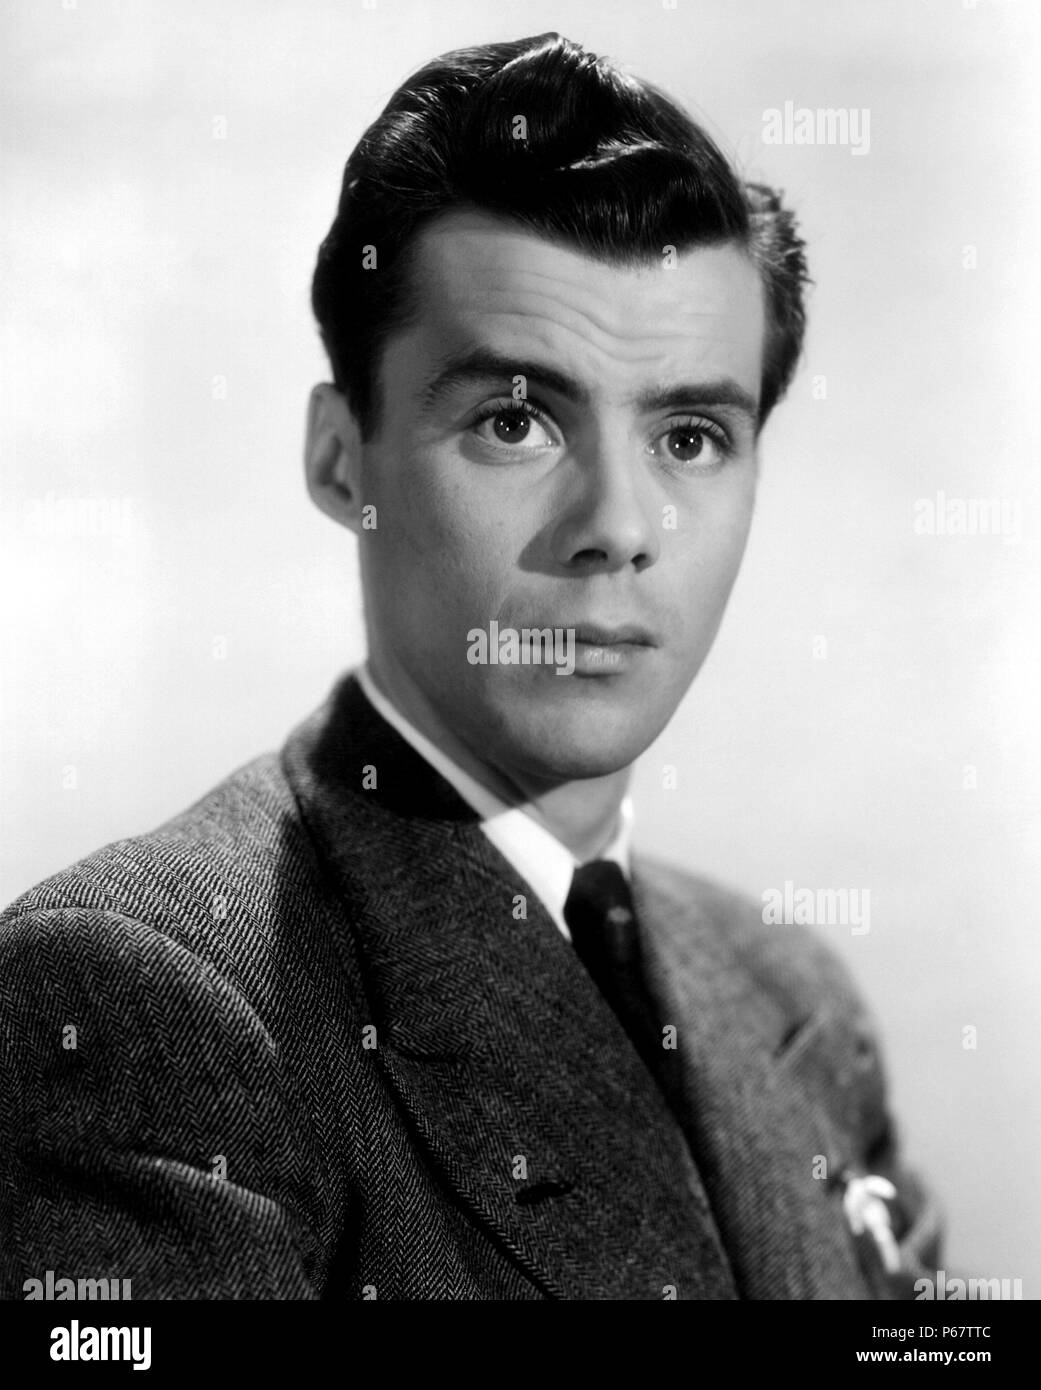 Sir Dirk Bogarde was an English actor and writer. Initially a matinée idol in such films as Doctor in the House and other Rank Organisation pictures, Bogarde later acted in art-house films such as Death in Venice. Bogarde wrote seven best-selling volumes of memoirs, six novels and a volume of collected journalism, mainly from his articles in The Daily Telegraph. Stock Photo